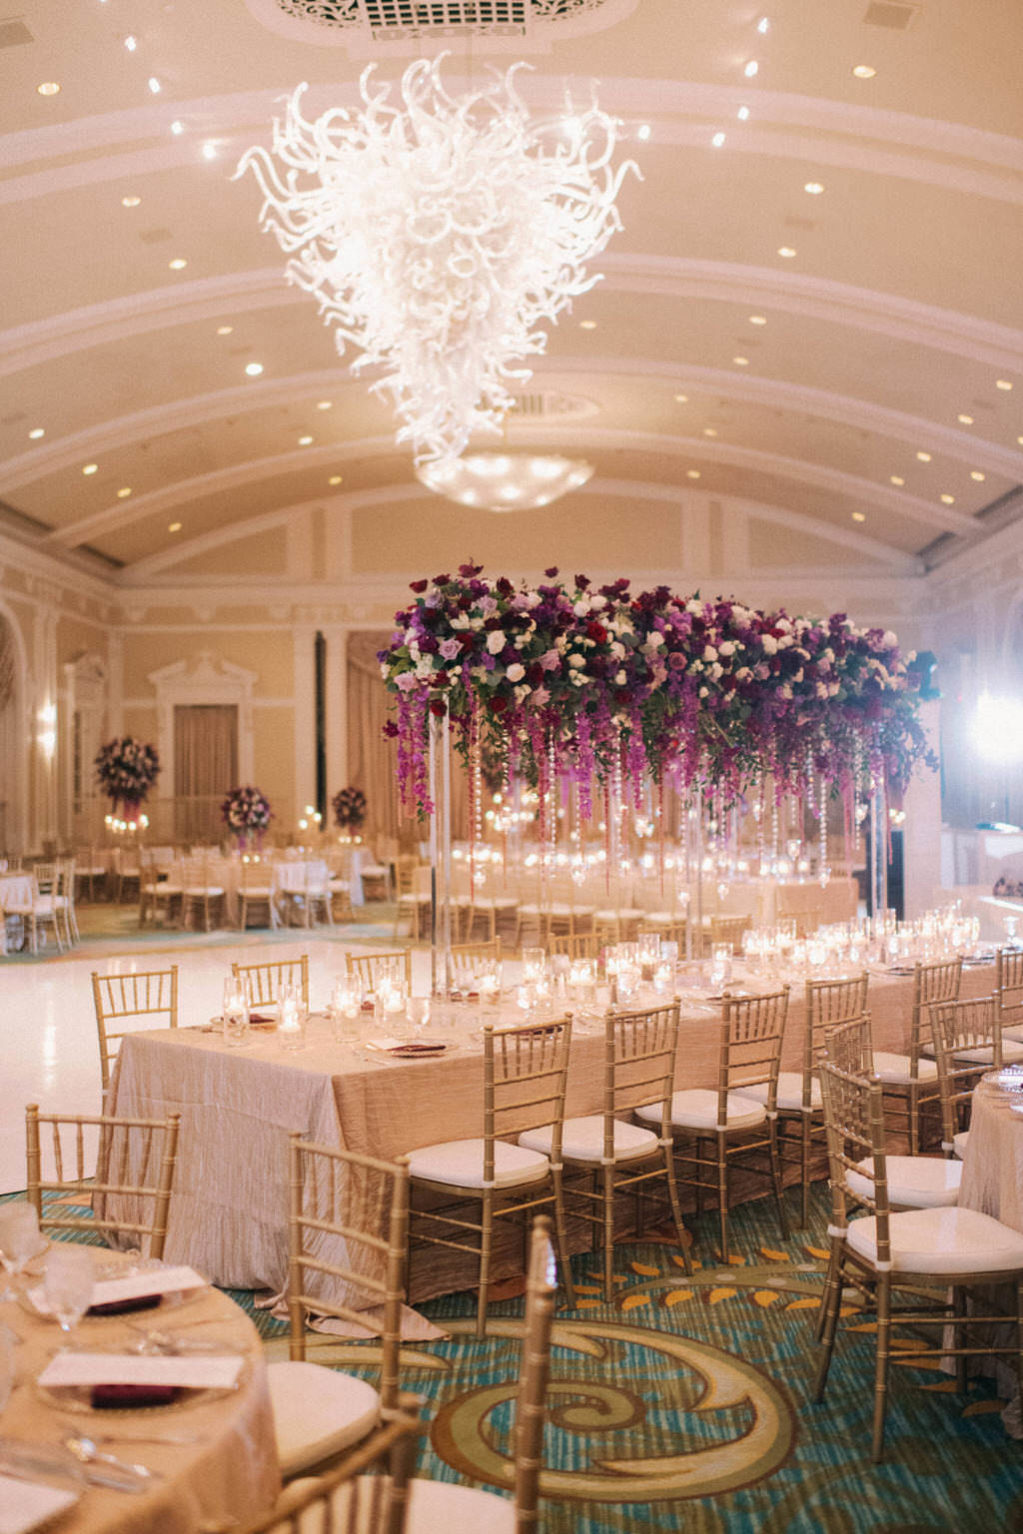 Elegant, Extravagant Wedding Reception Decor Portrait, Long Table with Gold Linen, Gold Chiavari Chairs, Tall Purple, Red, Plum, Lilac, Greenery and Purple Hanging Amaranthus Floral Centerpiece, Artistic Glass Chandelier | Downtown St. Pete Hotel Ballroom Wedding Venue The Vinoy Renaissance